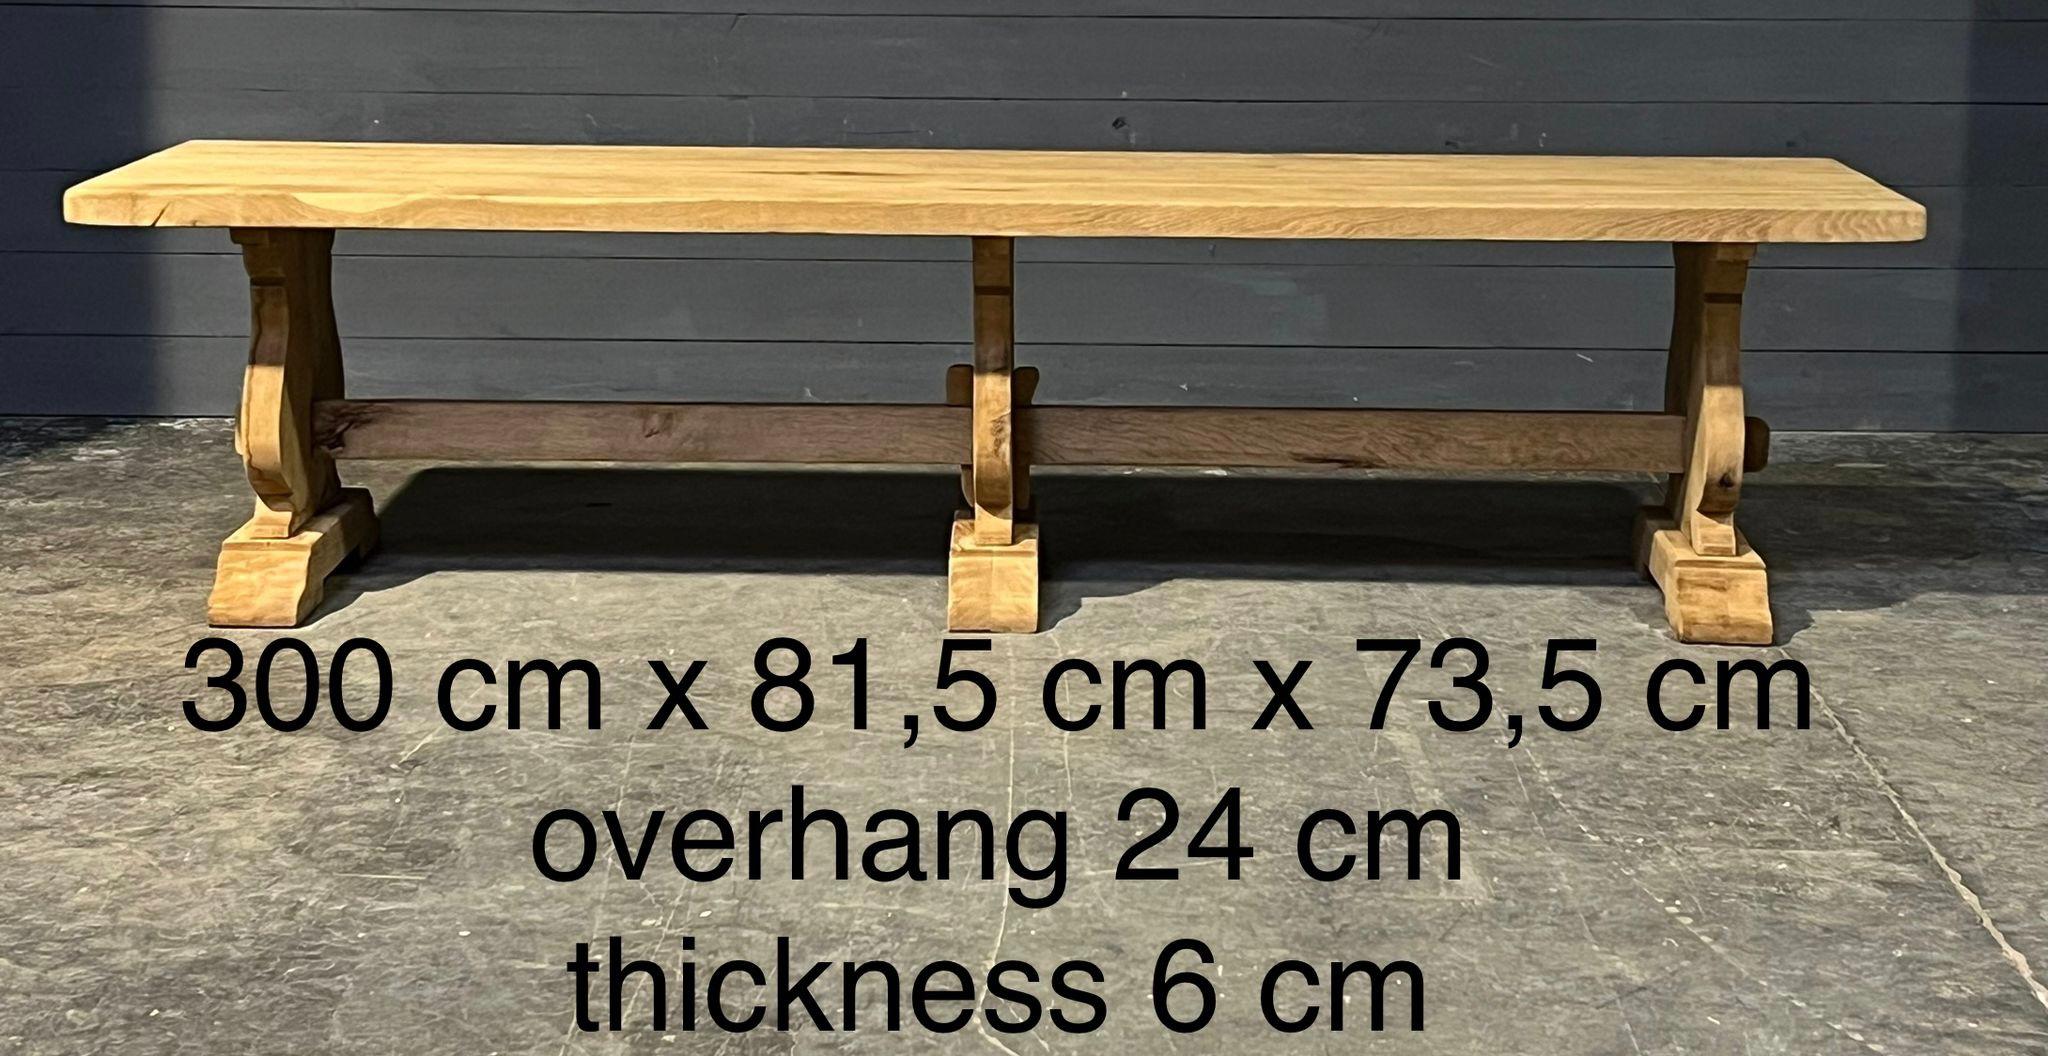 3 metre dining table